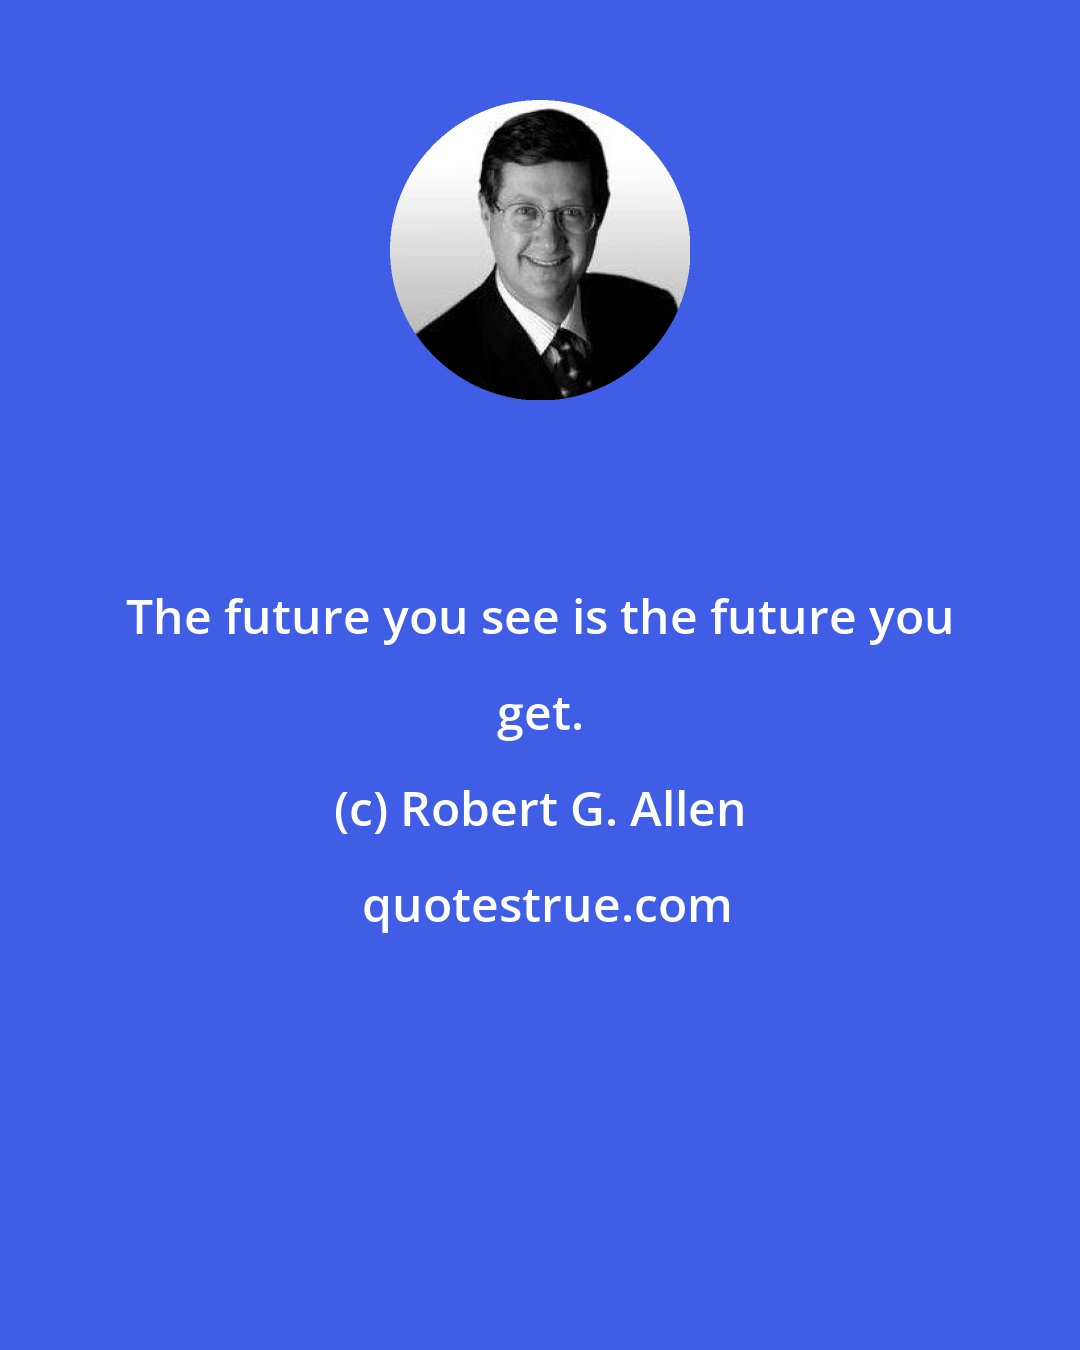 Robert G. Allen: The future you see is the future you get.